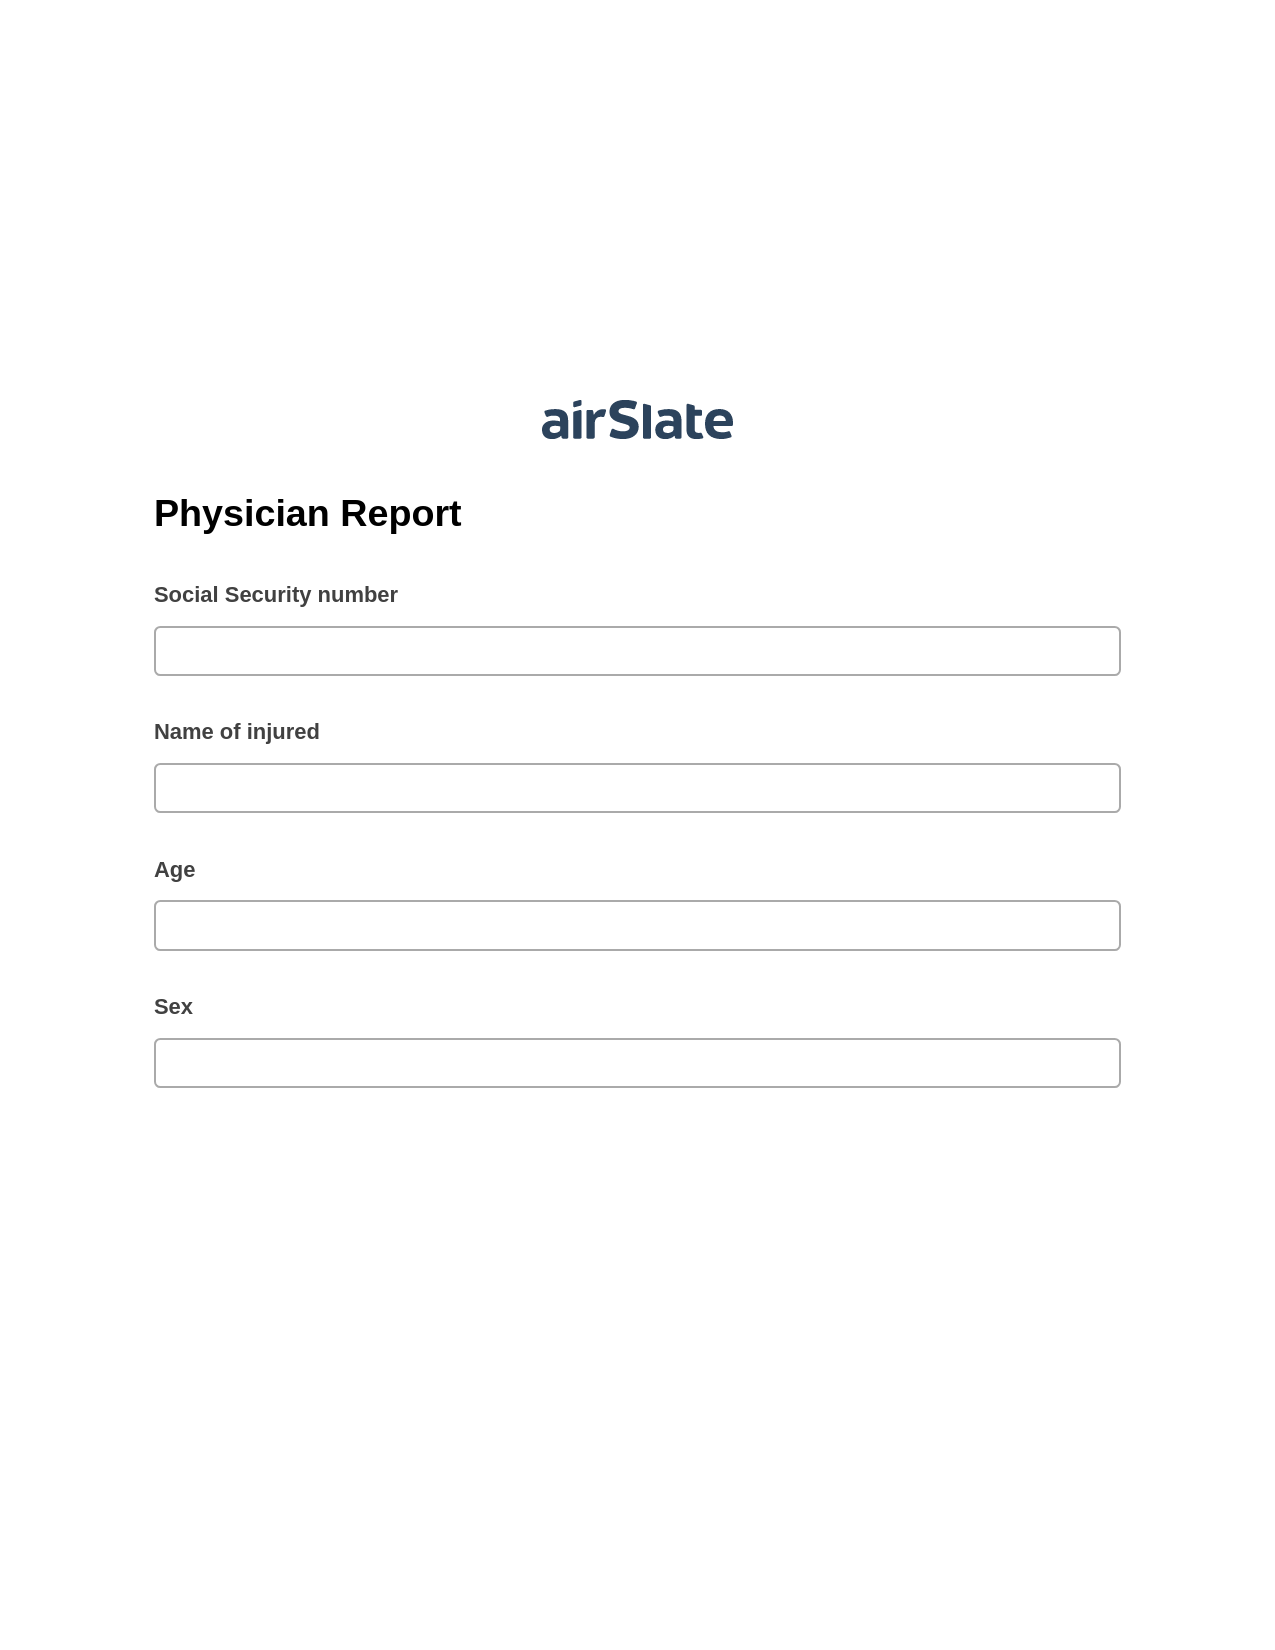 Multirole Physician Report Prefill from NetSuite records, Invoke Salesforce Process Bot, Archive to SharePoint Folder Bot